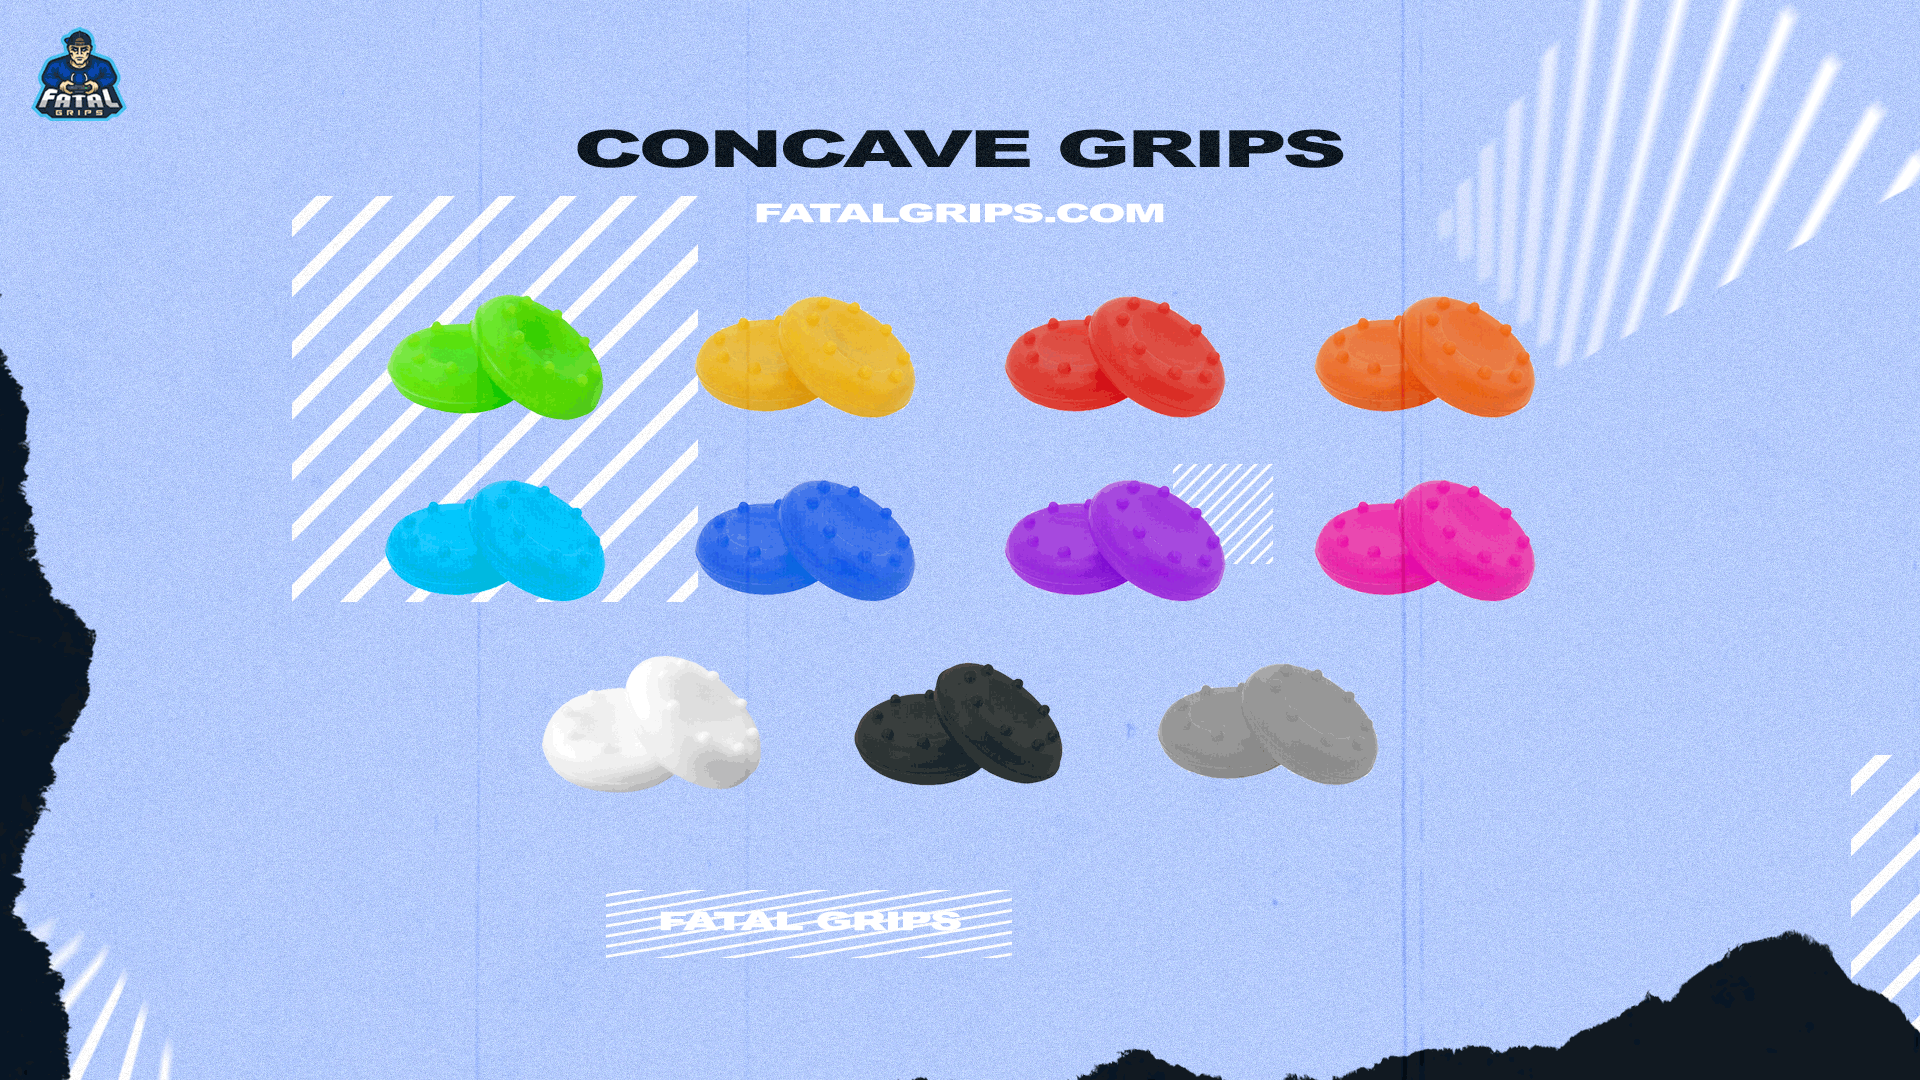 Concave Grips